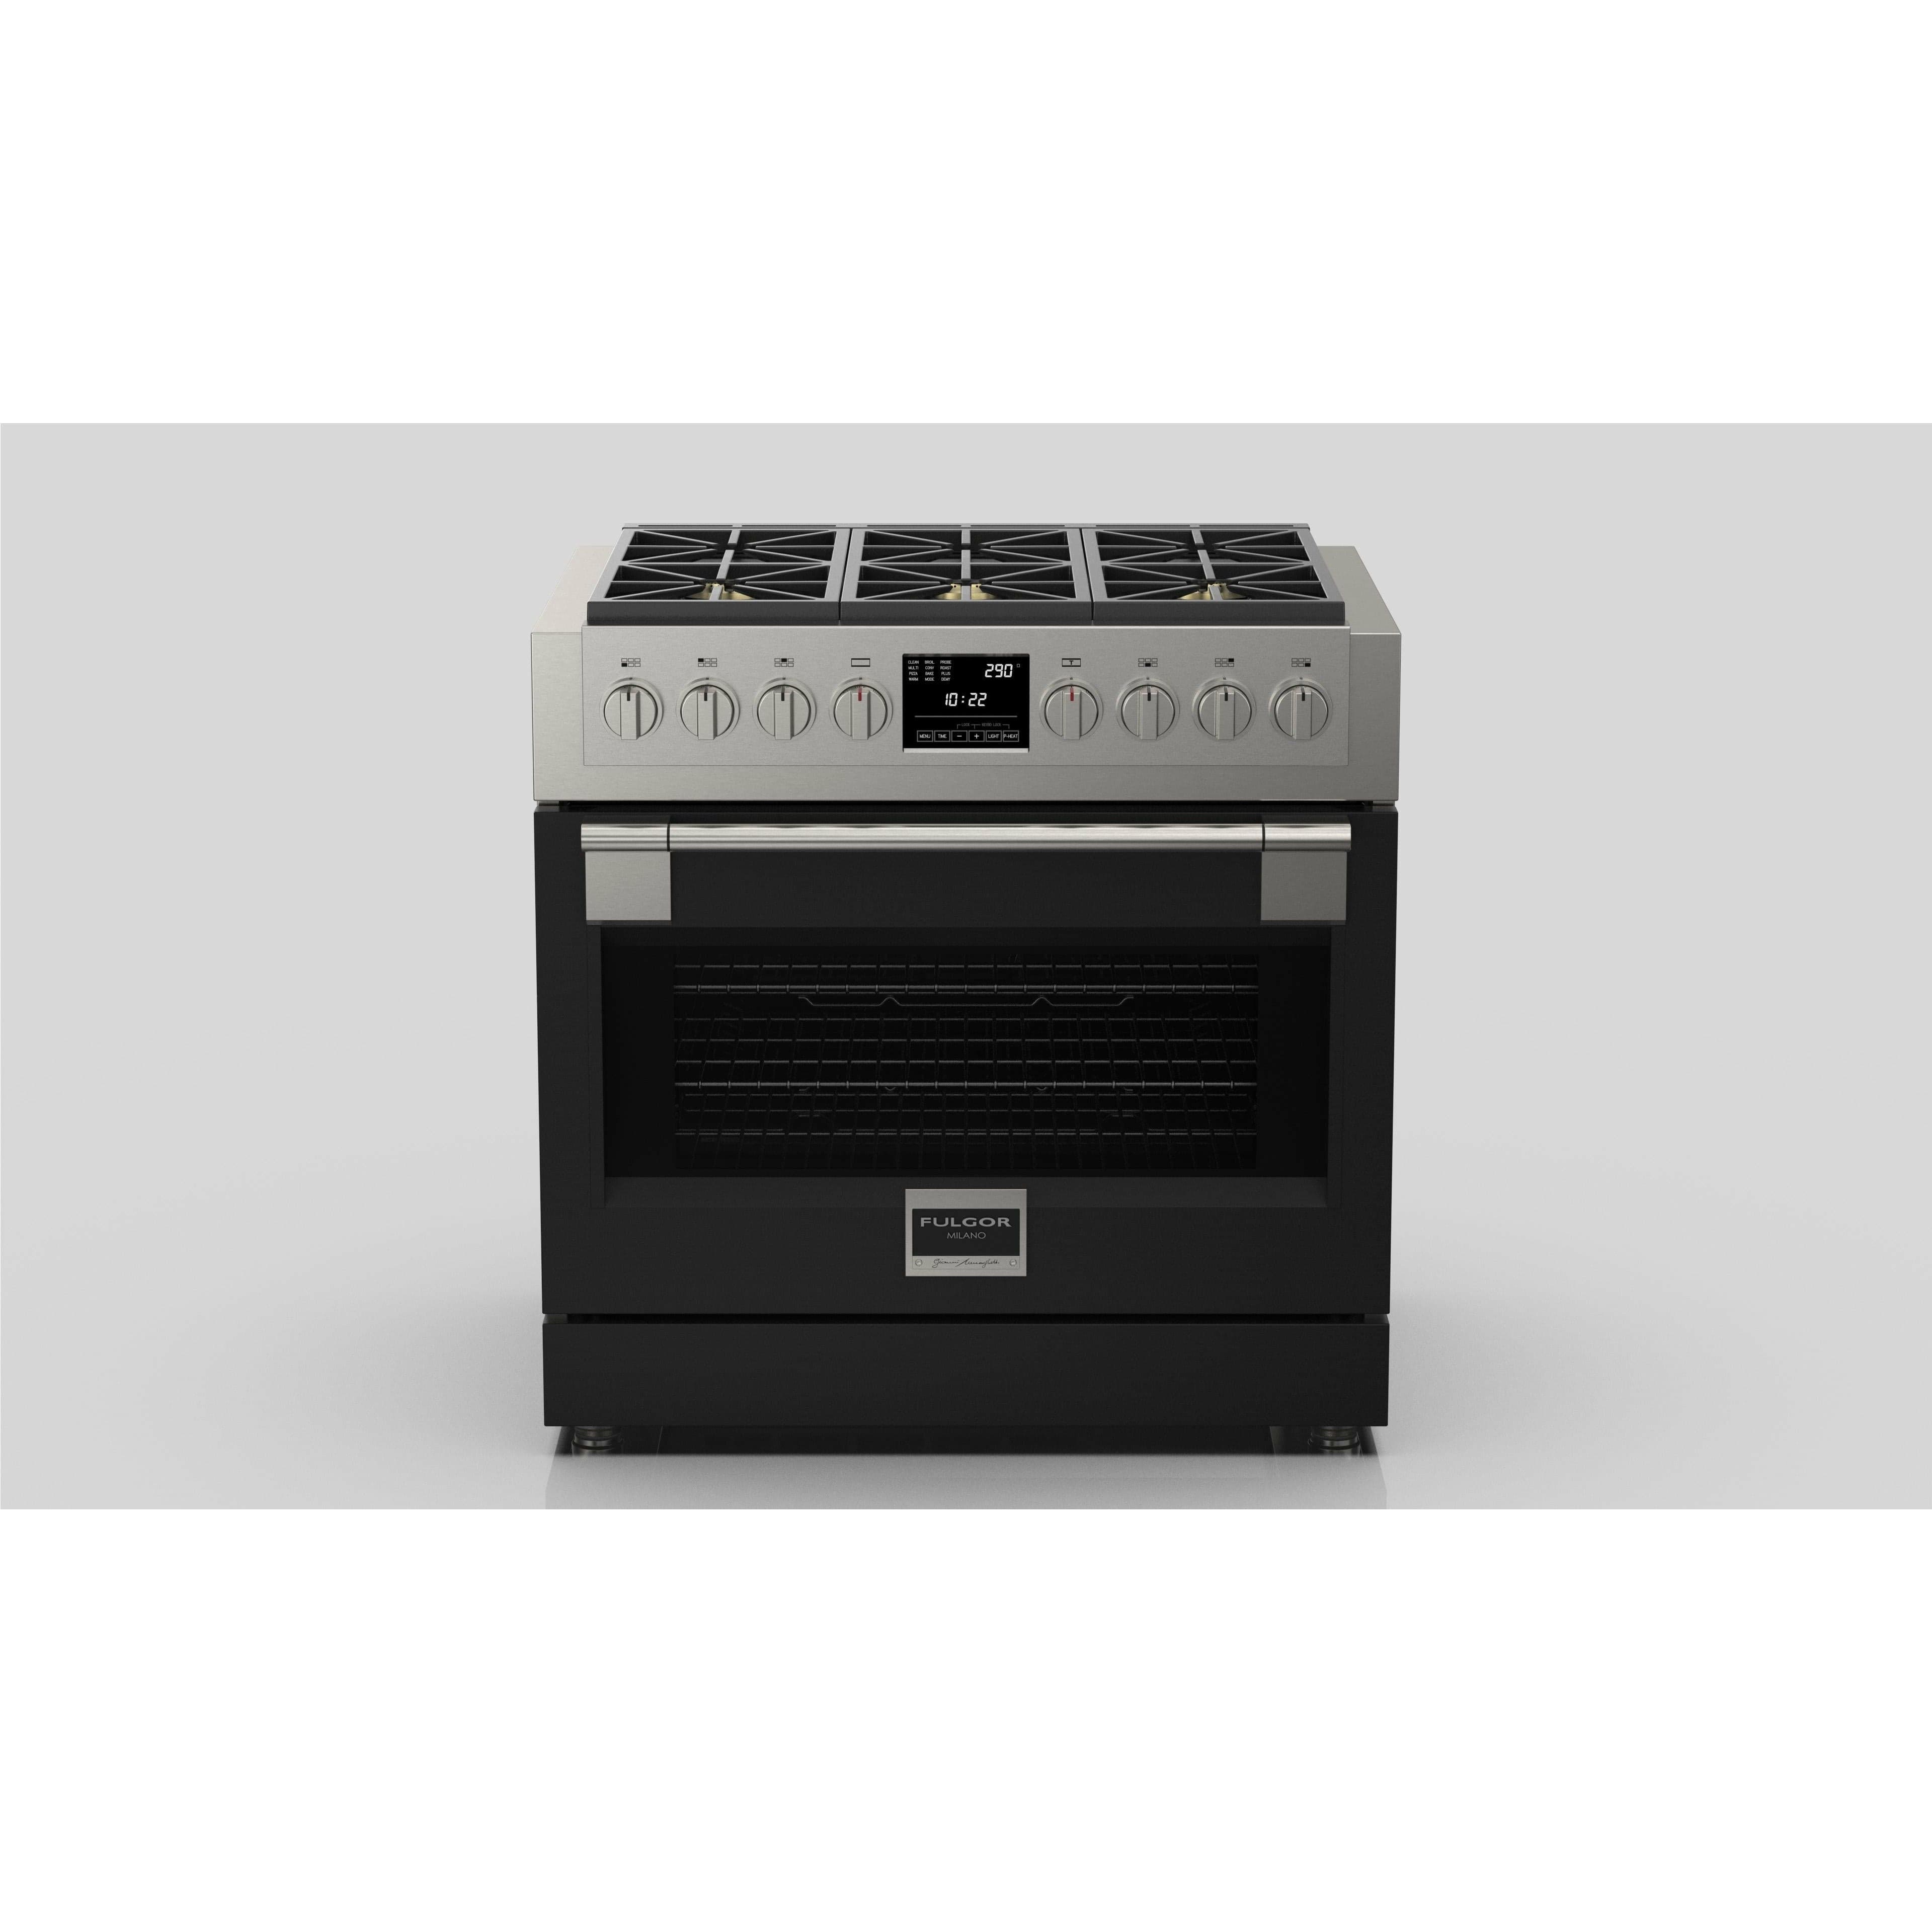 Fulgor Milano 36" Freestanding Dual Pro Fuel Range with Four 18,000 BTU Burners, Stainless Steel - F6PDF366S1 Ranges F6PDF366S1 + PDRKIT36MB Luxury Appliances Direct